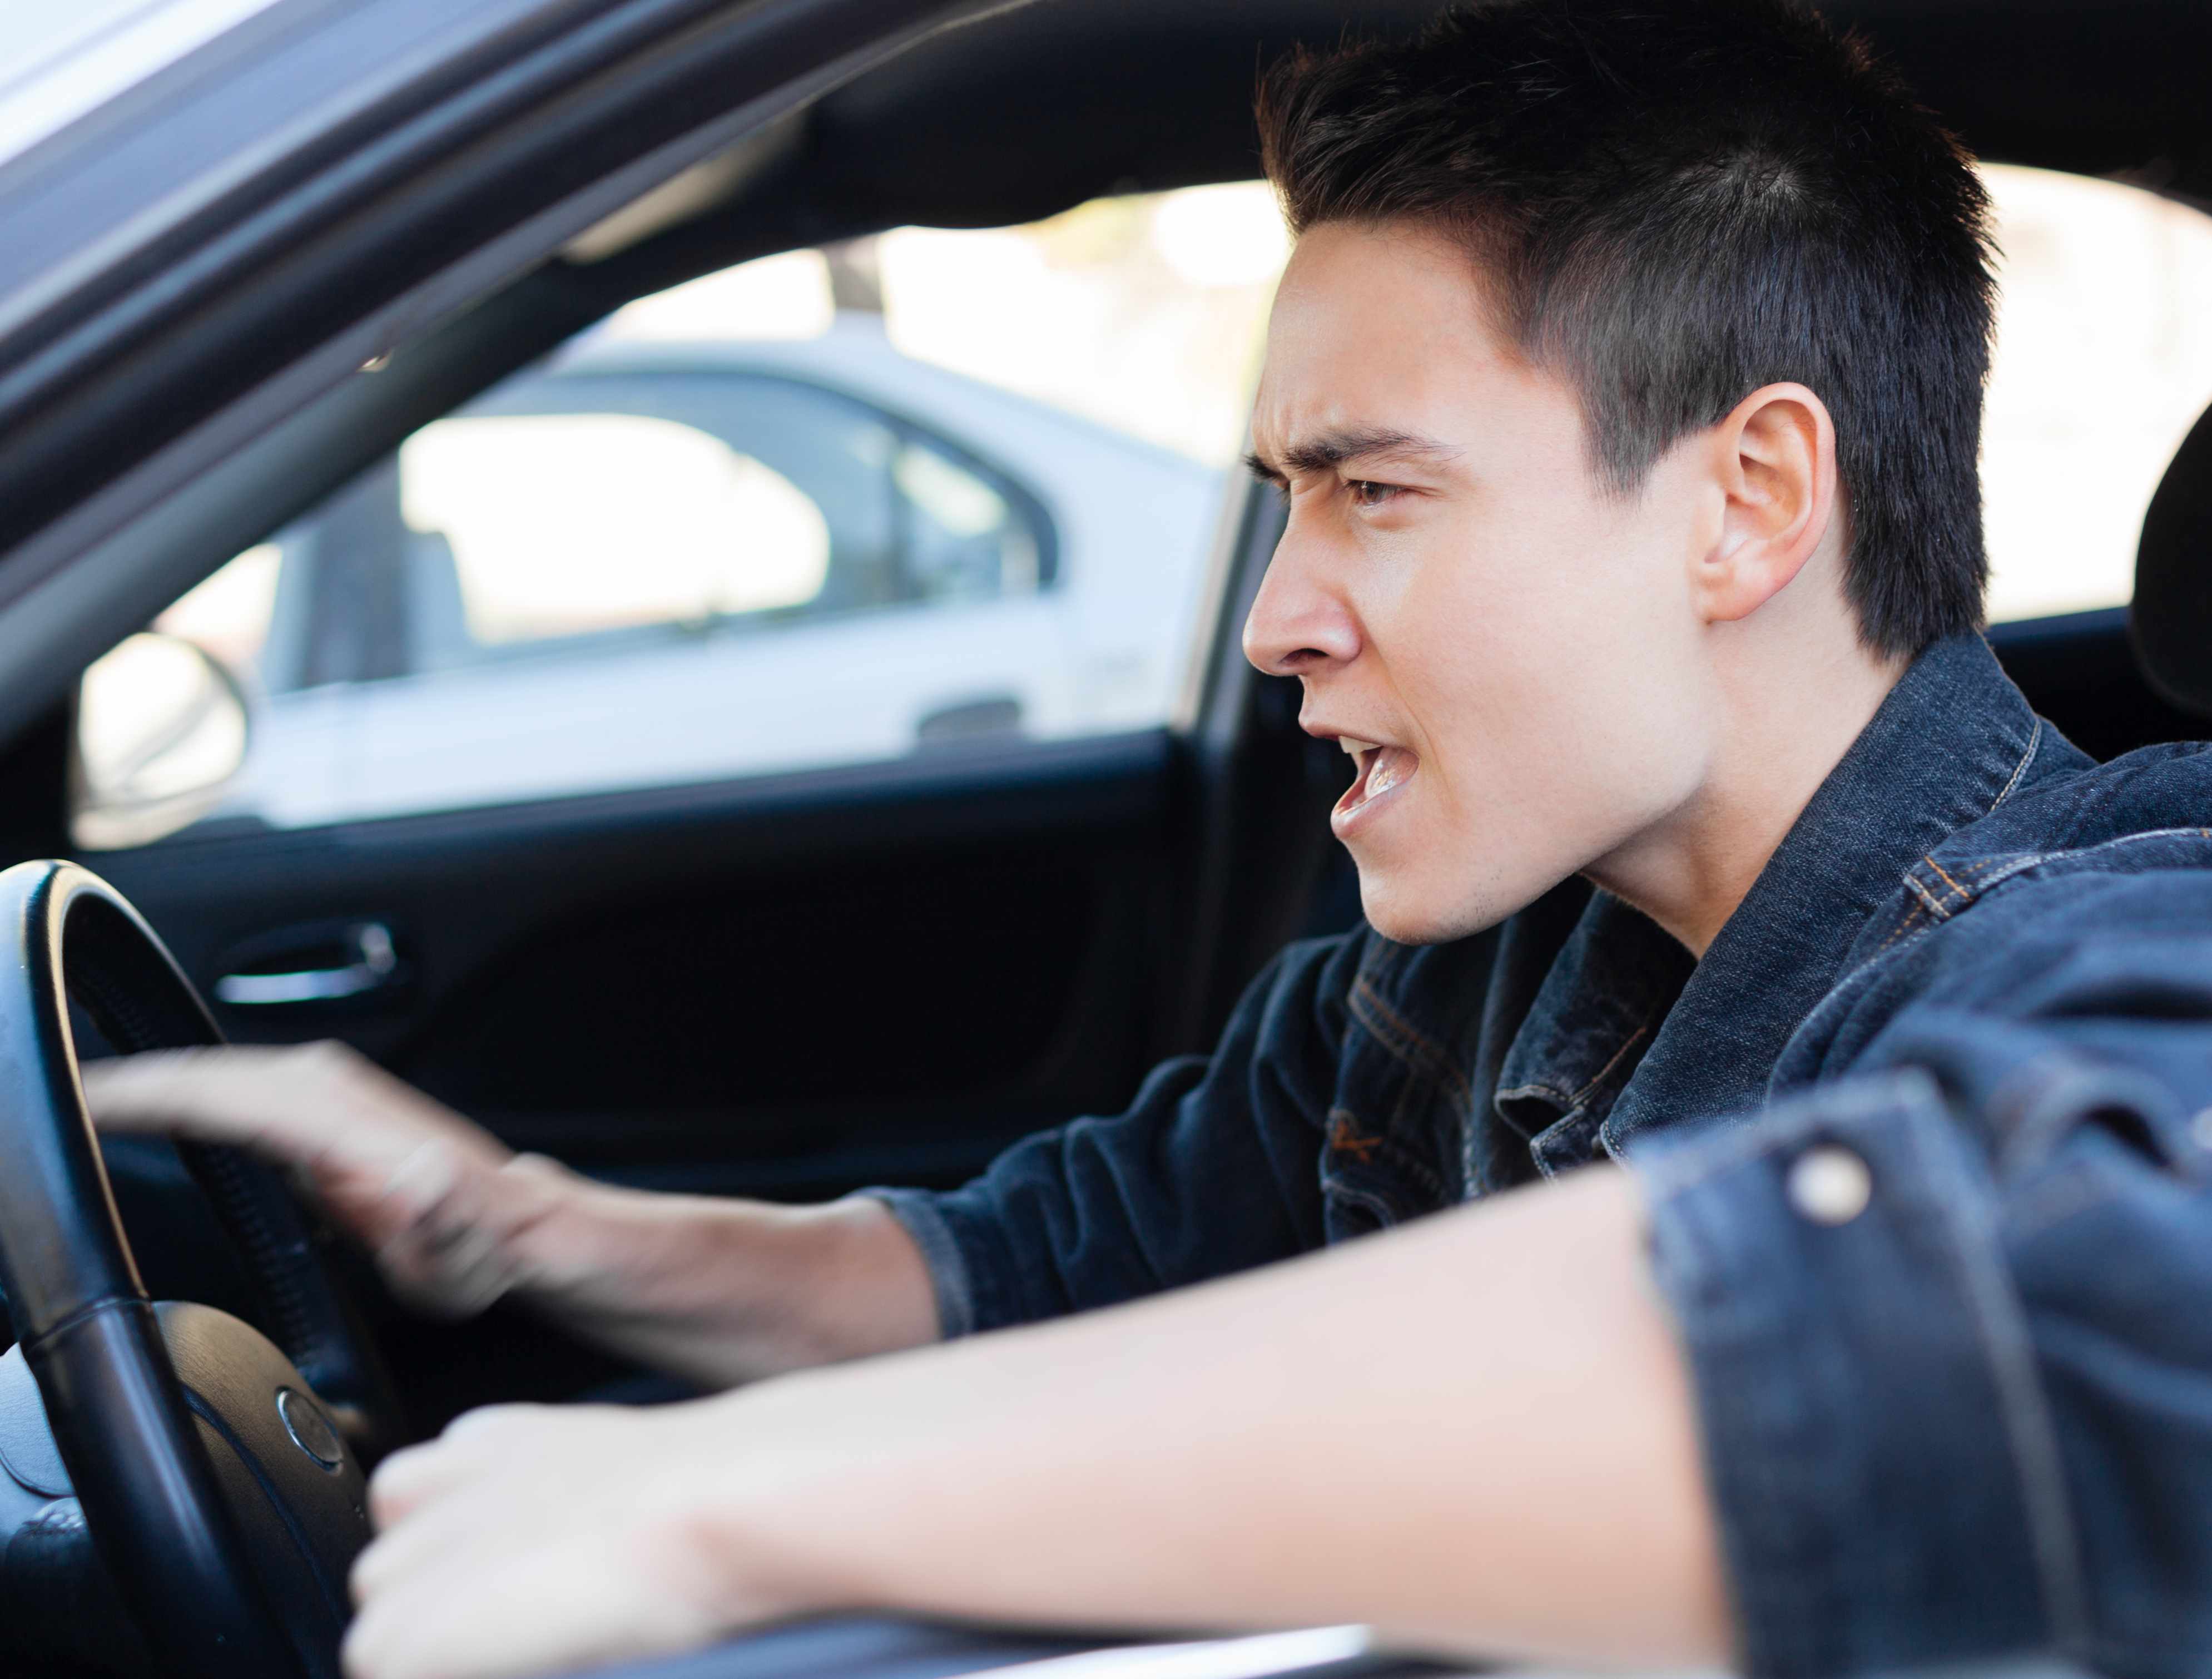 a young man driving angry behind the wheel, road rage